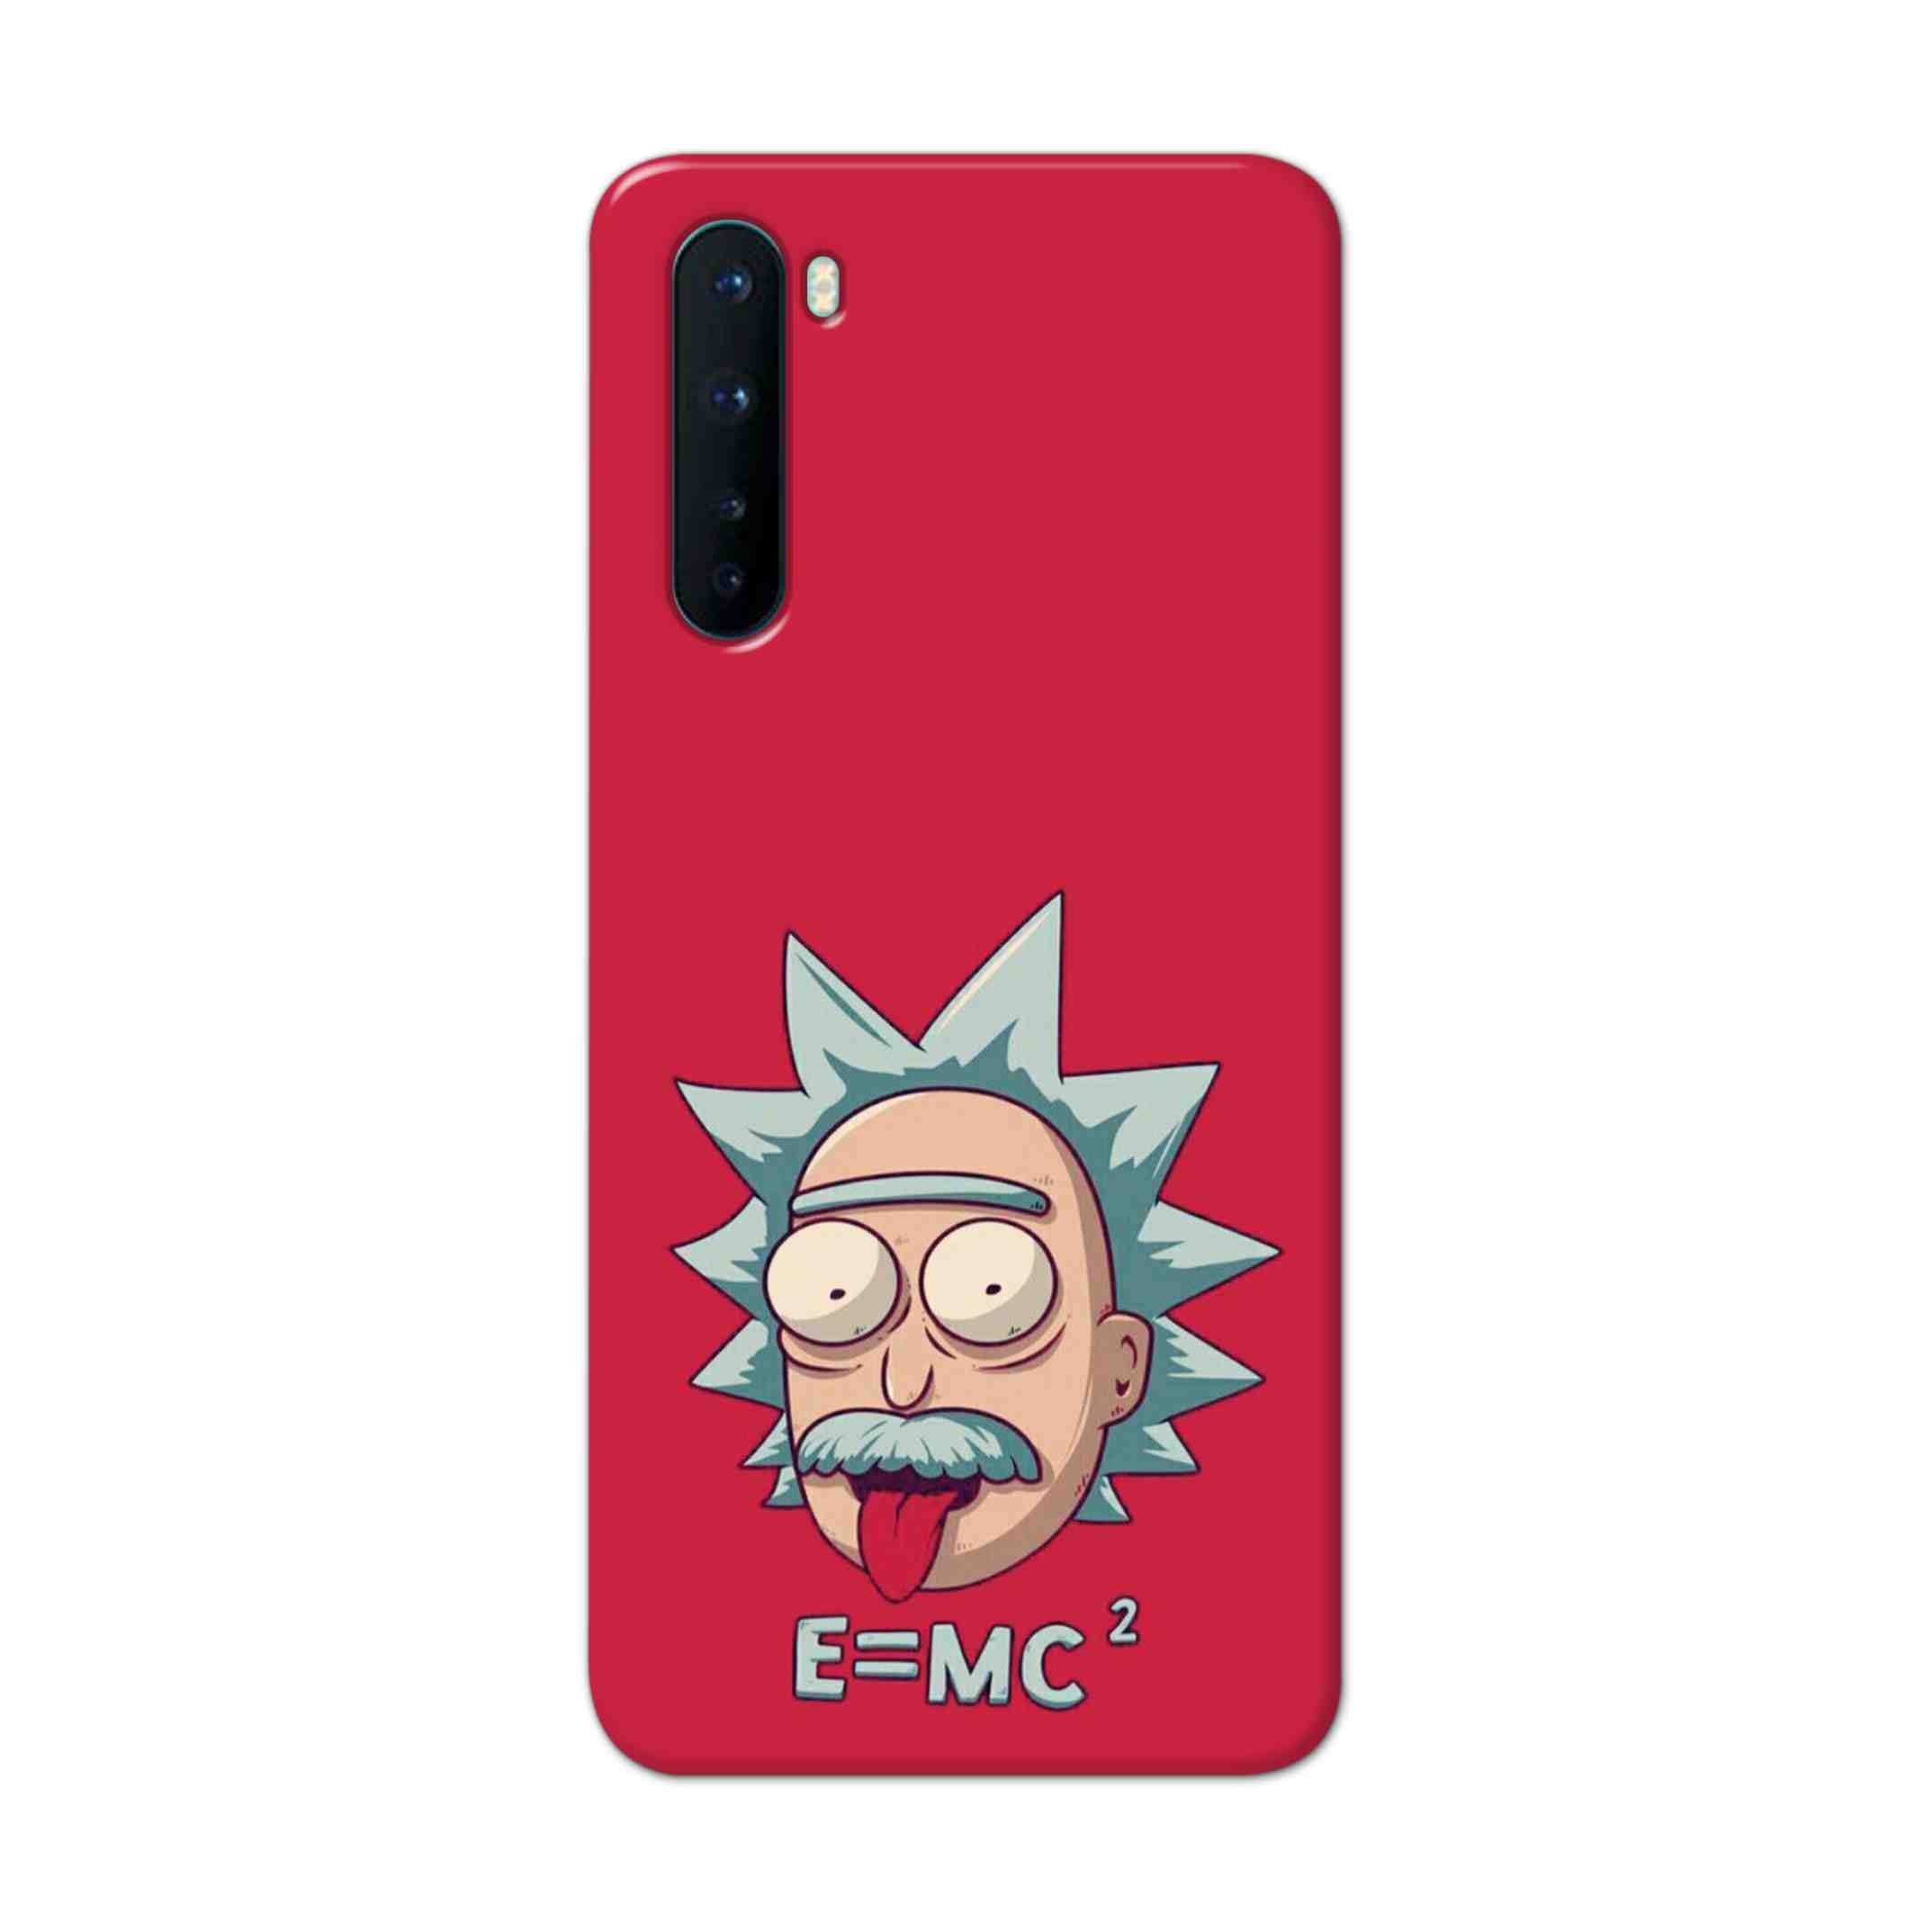 Buy E=Mc Hard Back Mobile Phone Case Cover For OnePlus Nord Online